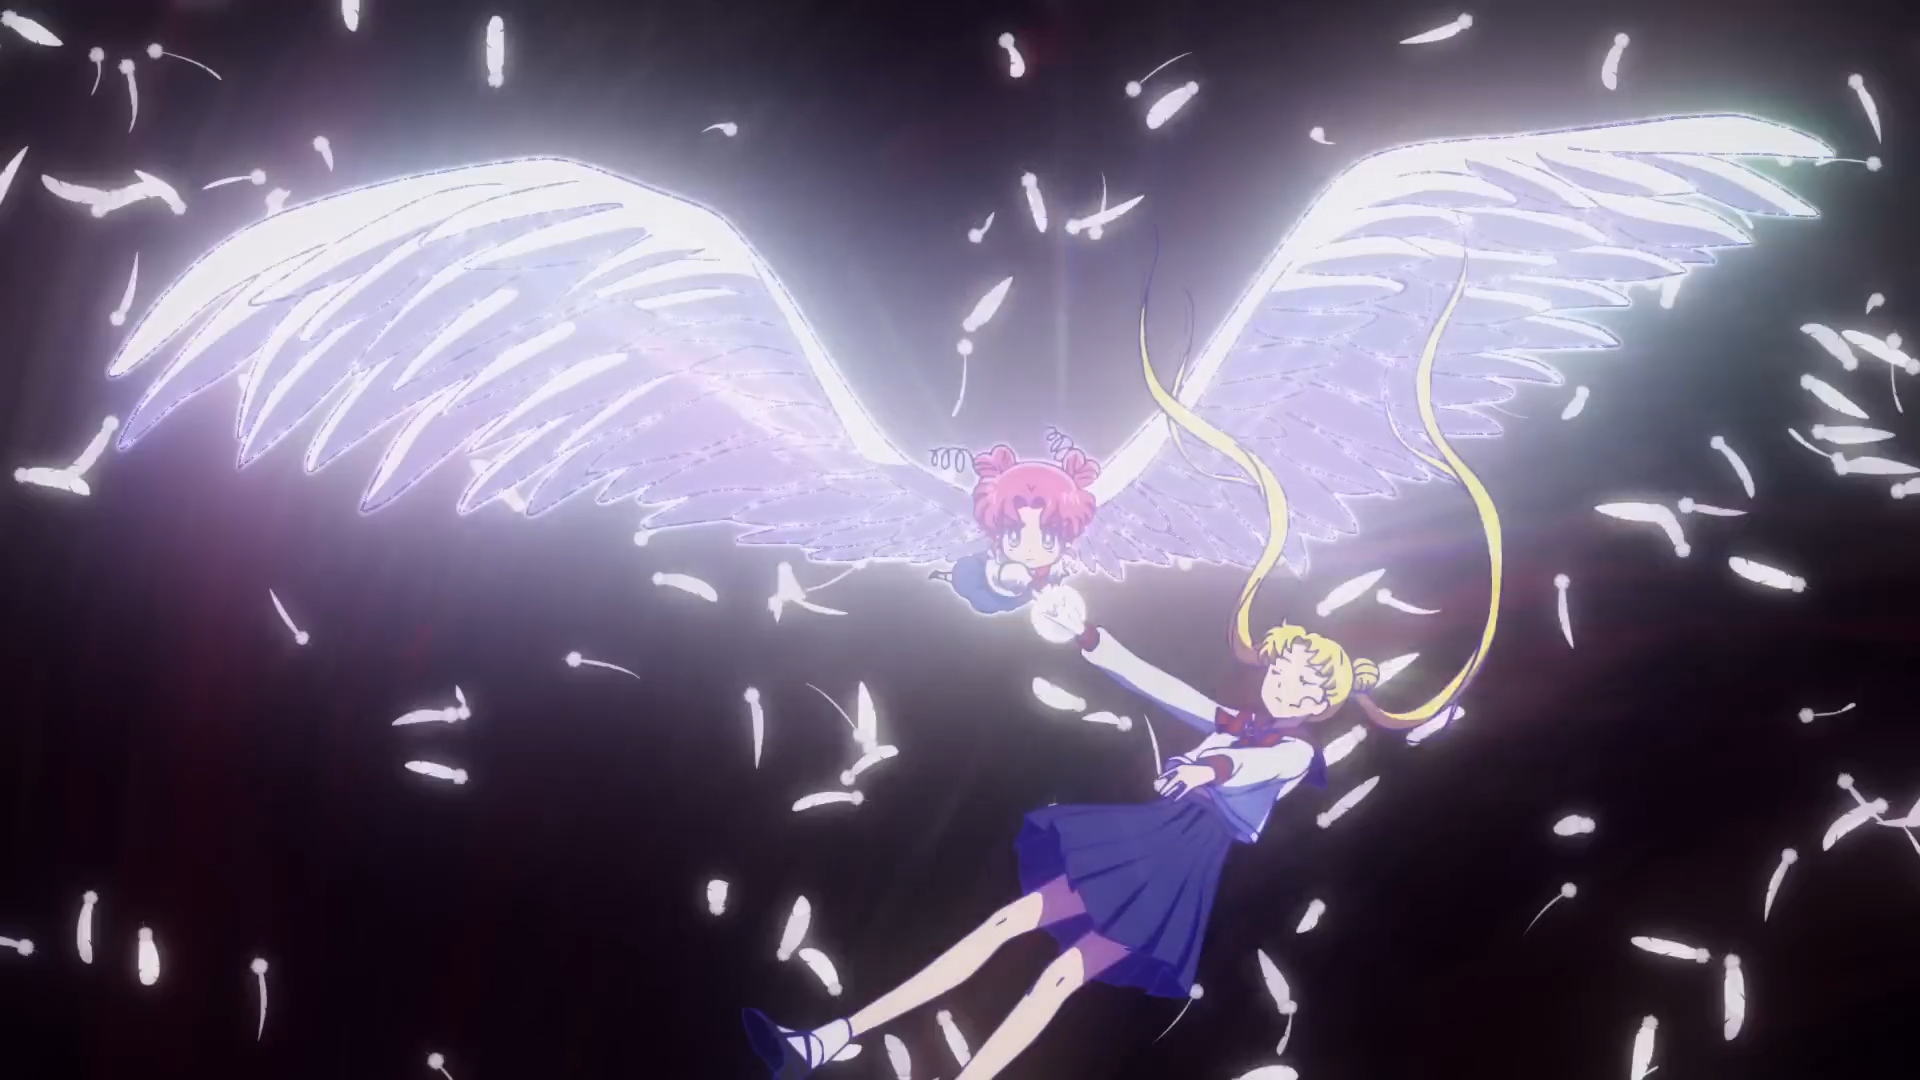 Sailor Moon Cosmos part 1 & 2 release dates, what to expect, and more